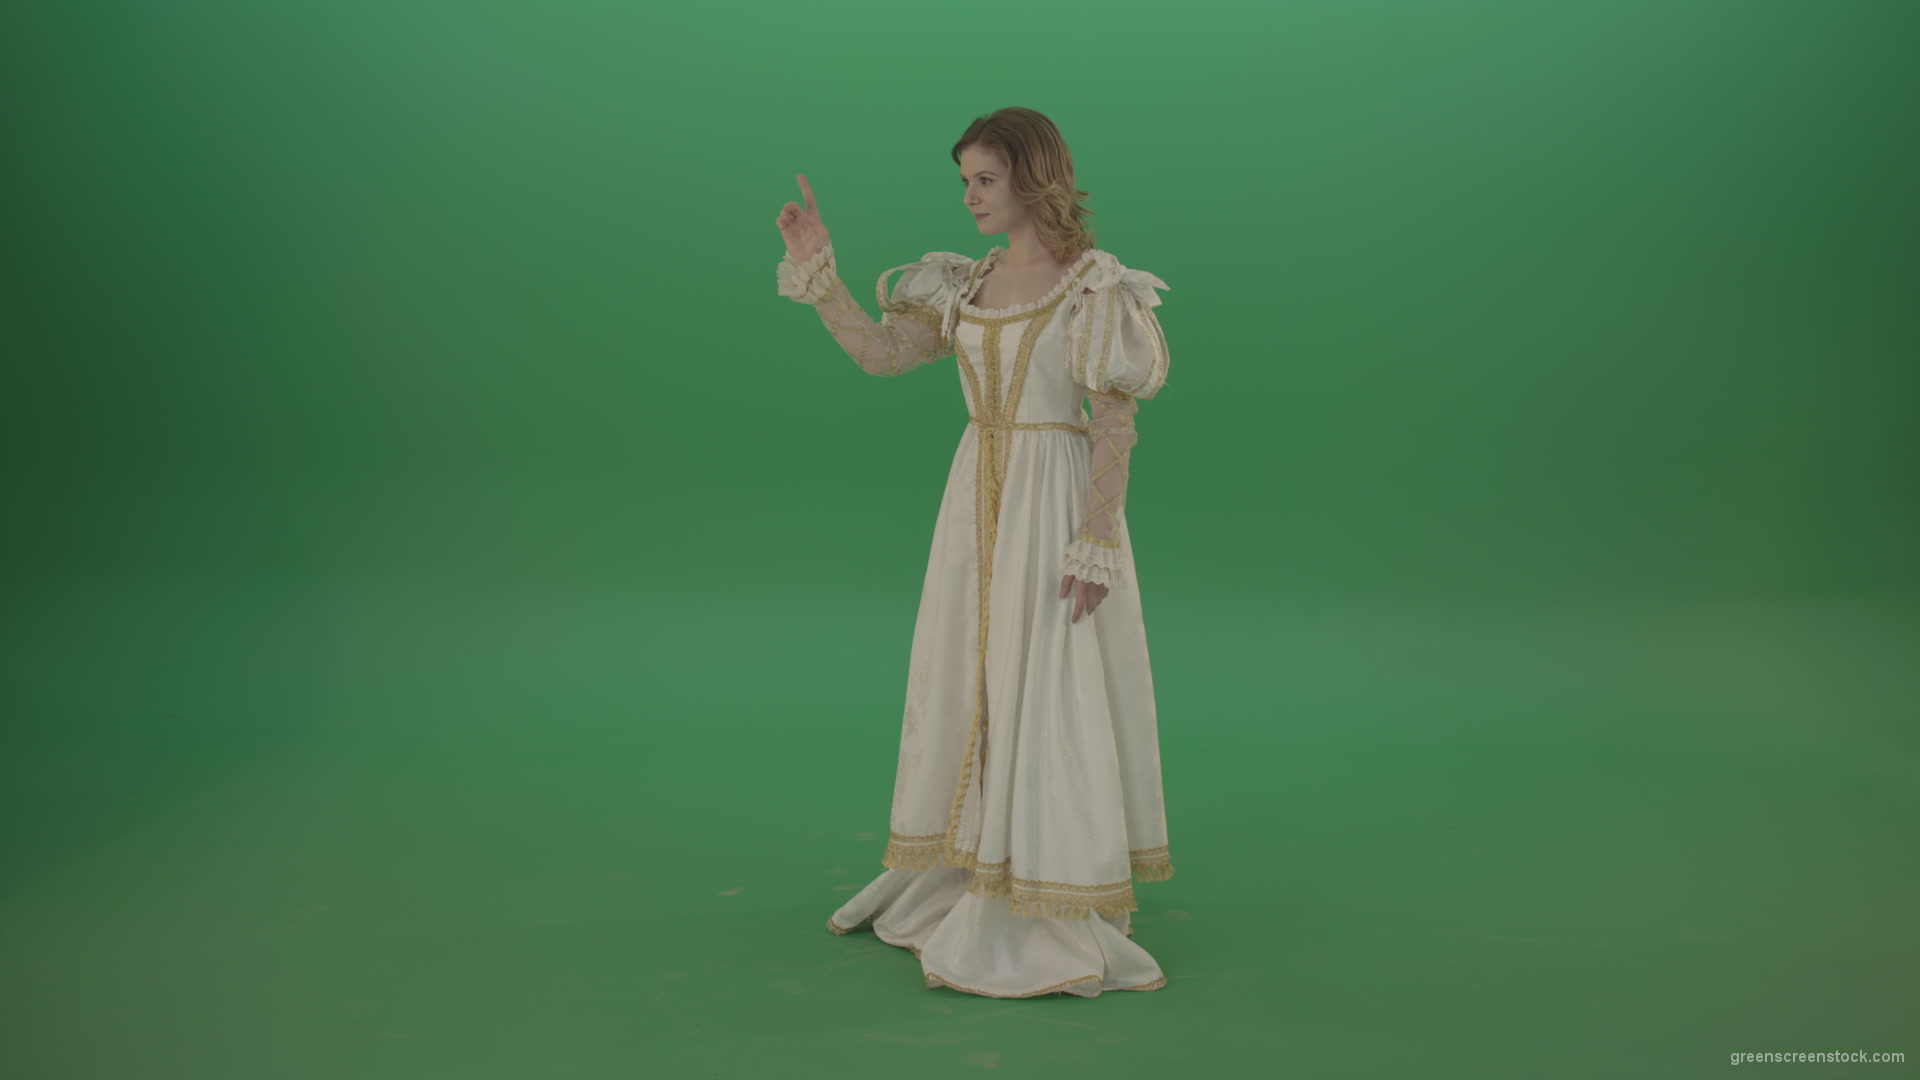 Finding-a-girl-on-the-touch-screen-is-looking-at-the-photo-with-pleasure-isolated-on-green-screen_006 Green Screen Stock